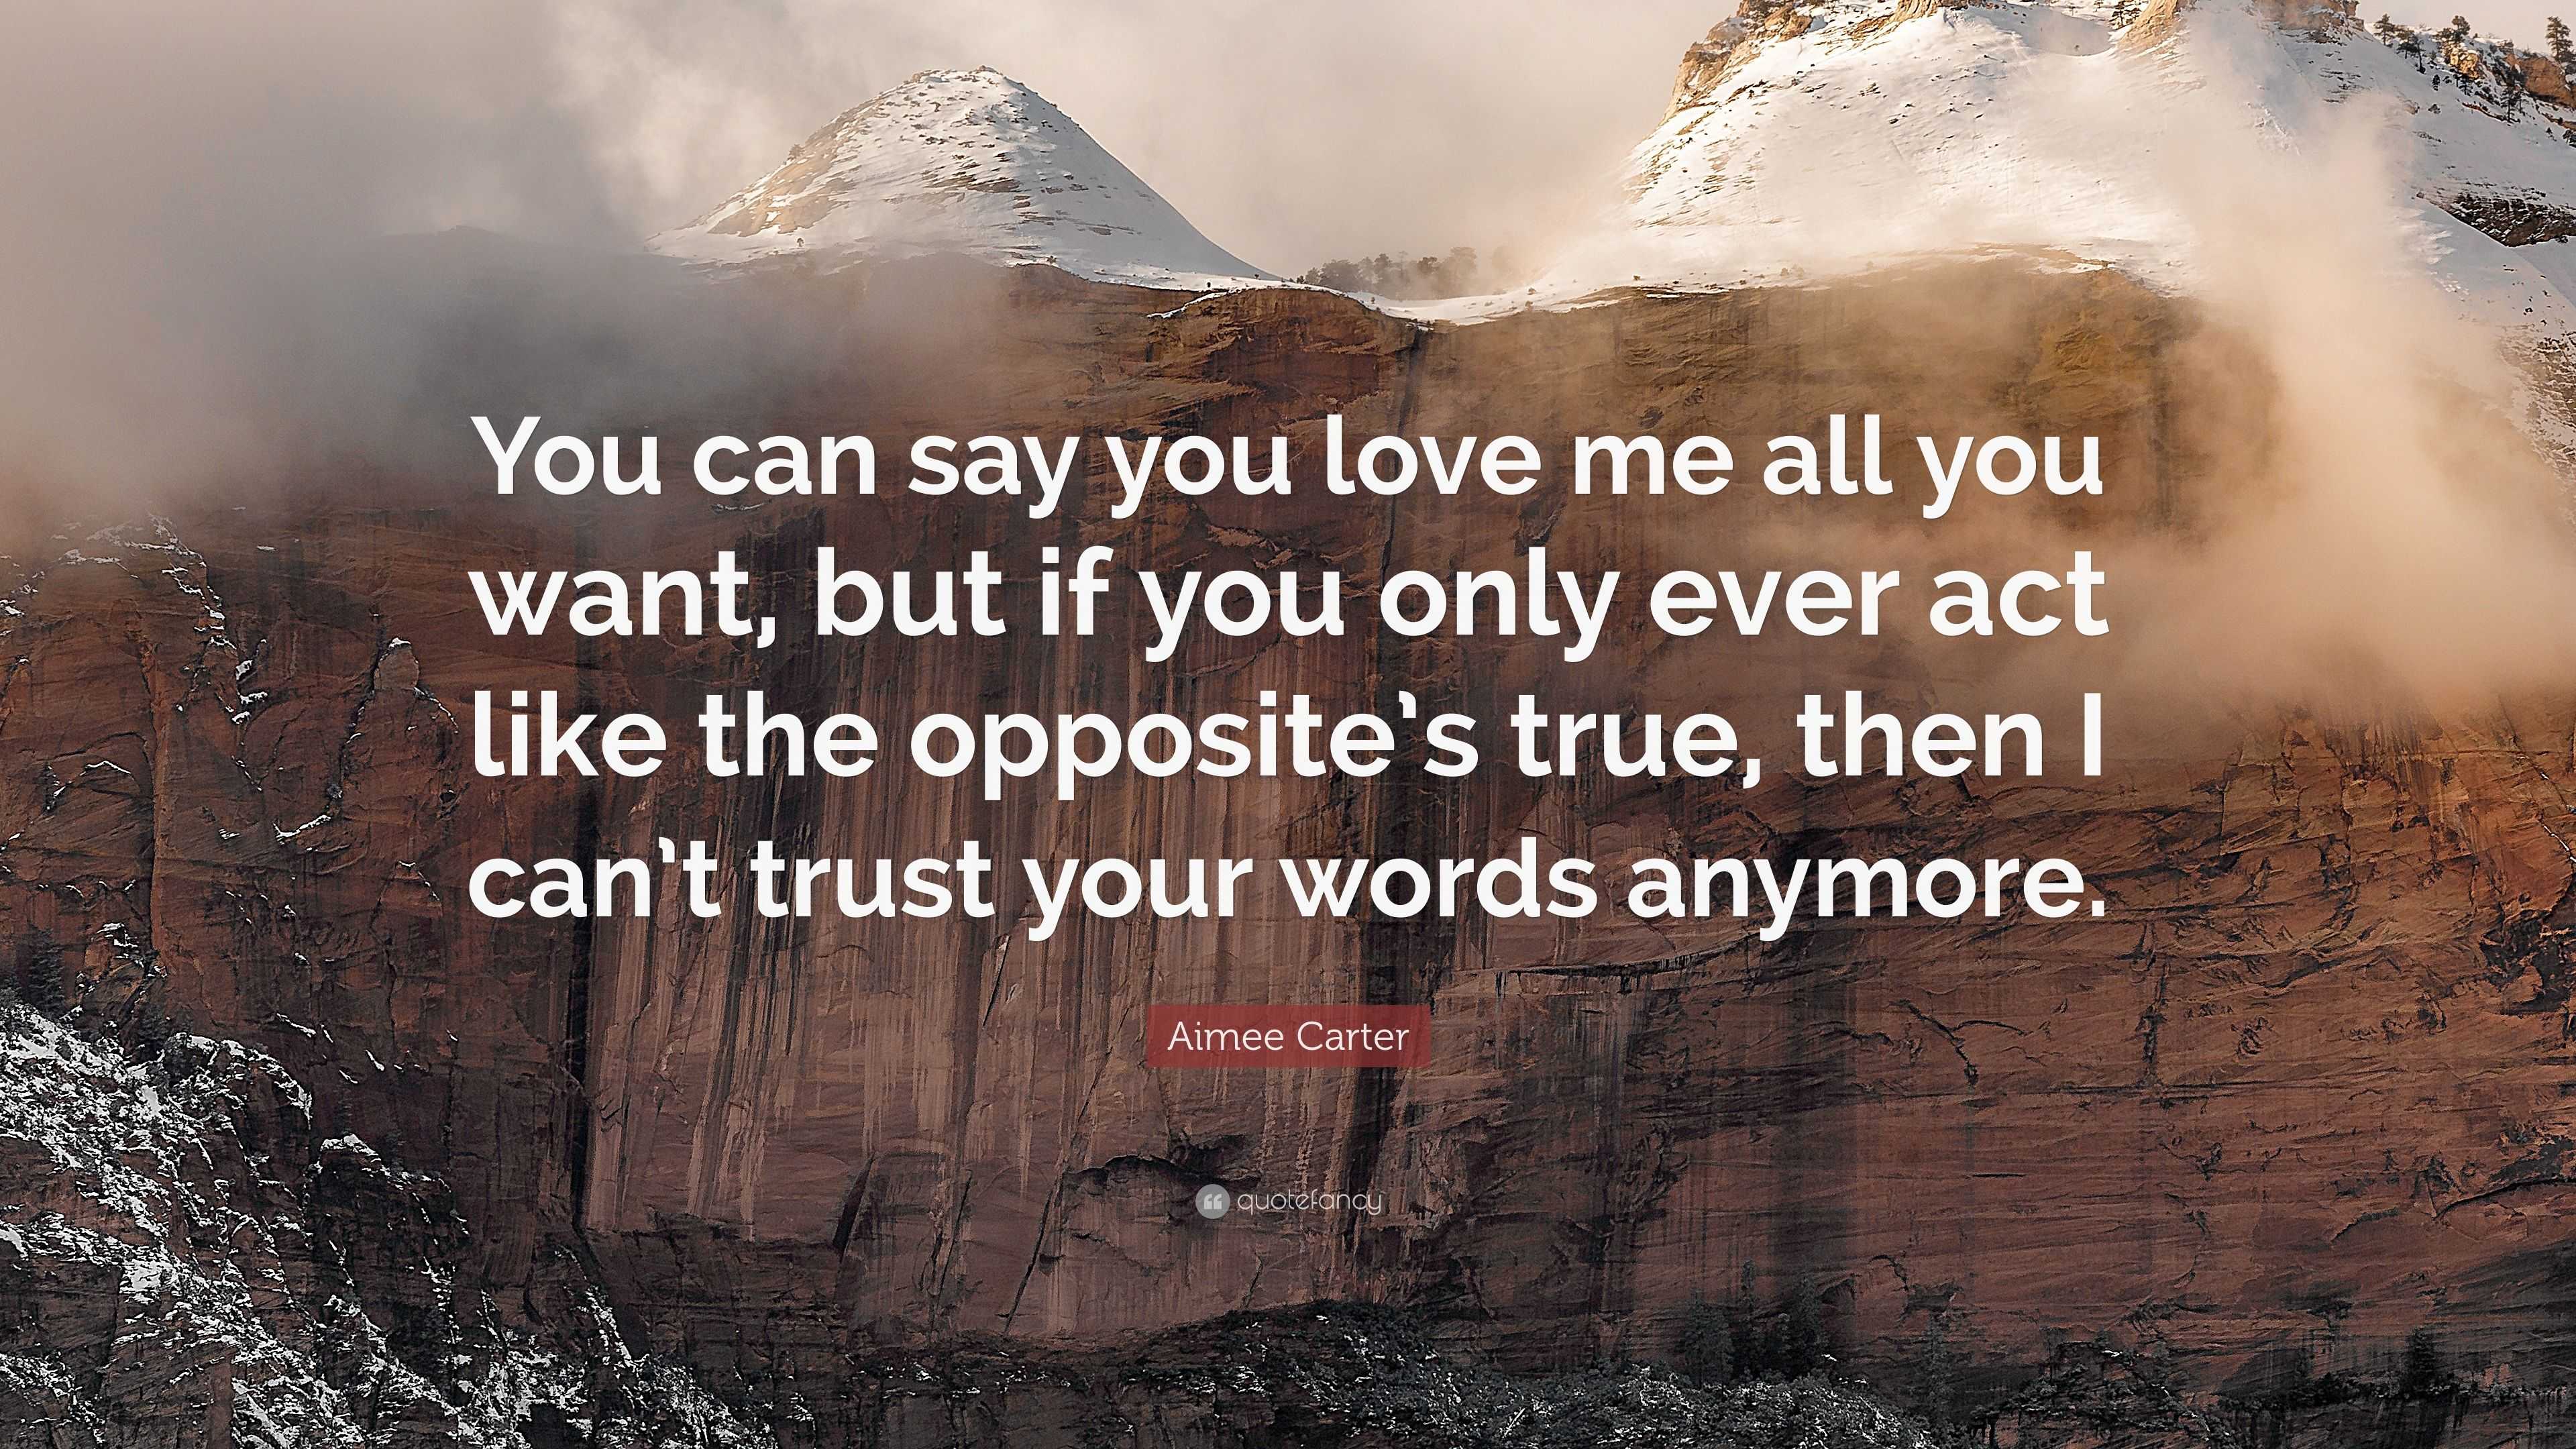 Act Like You Love Me 115 Aimee Carter Quote: “You can say you love me all you want, but if you only  ever act like the opposite's true, then I can't trust your words a...”